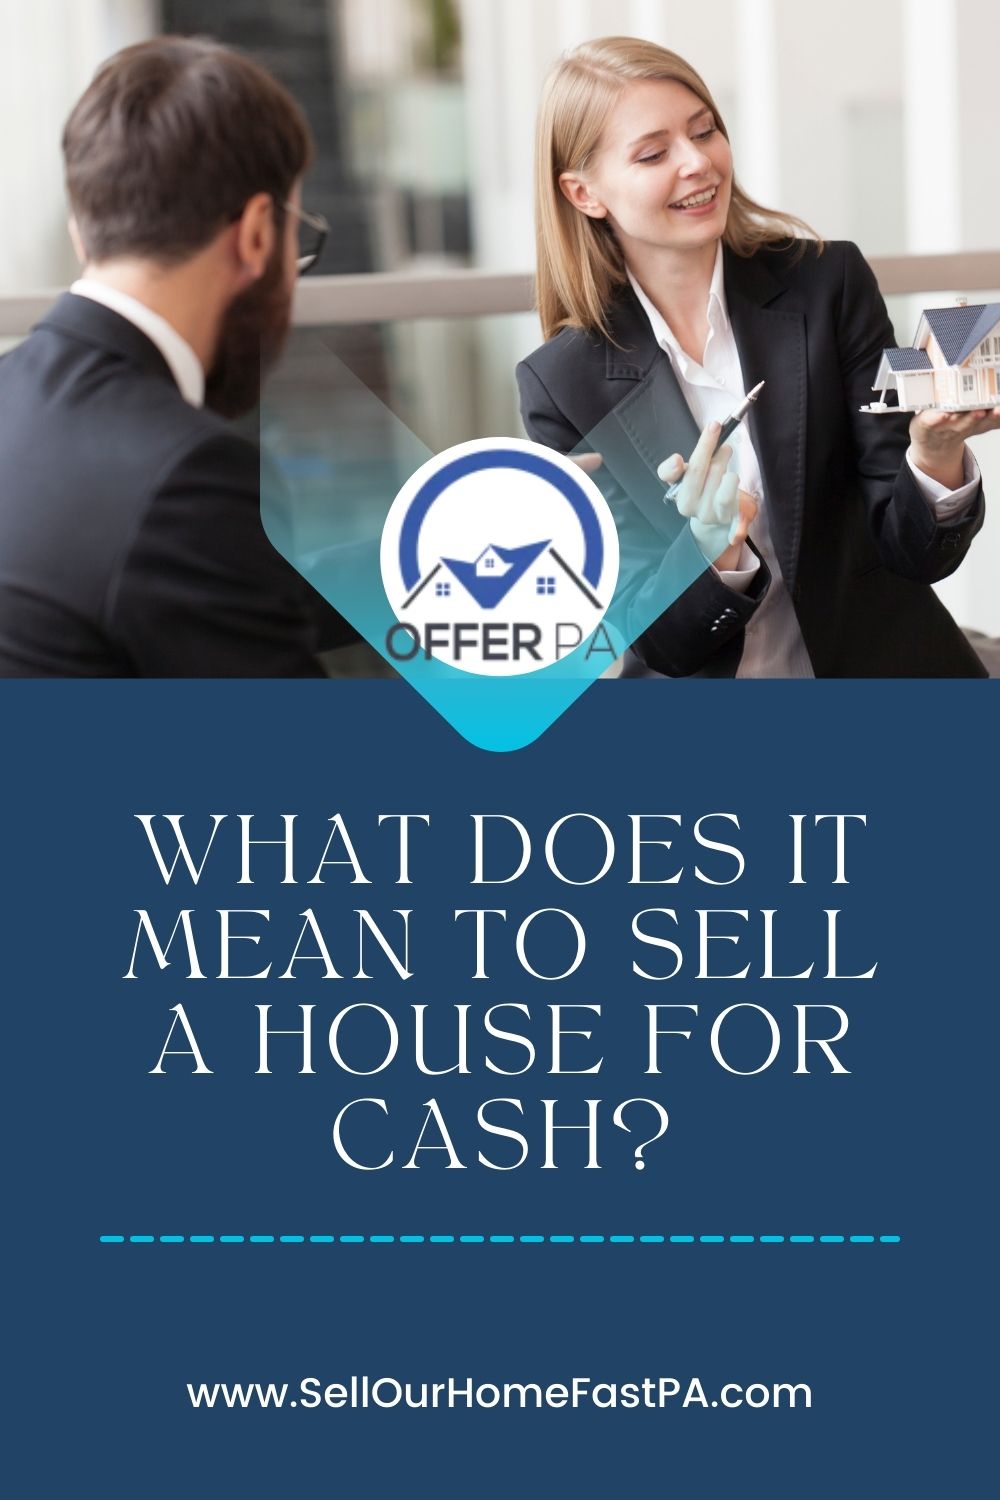 What Does it Mean to Sell a House for Cash?